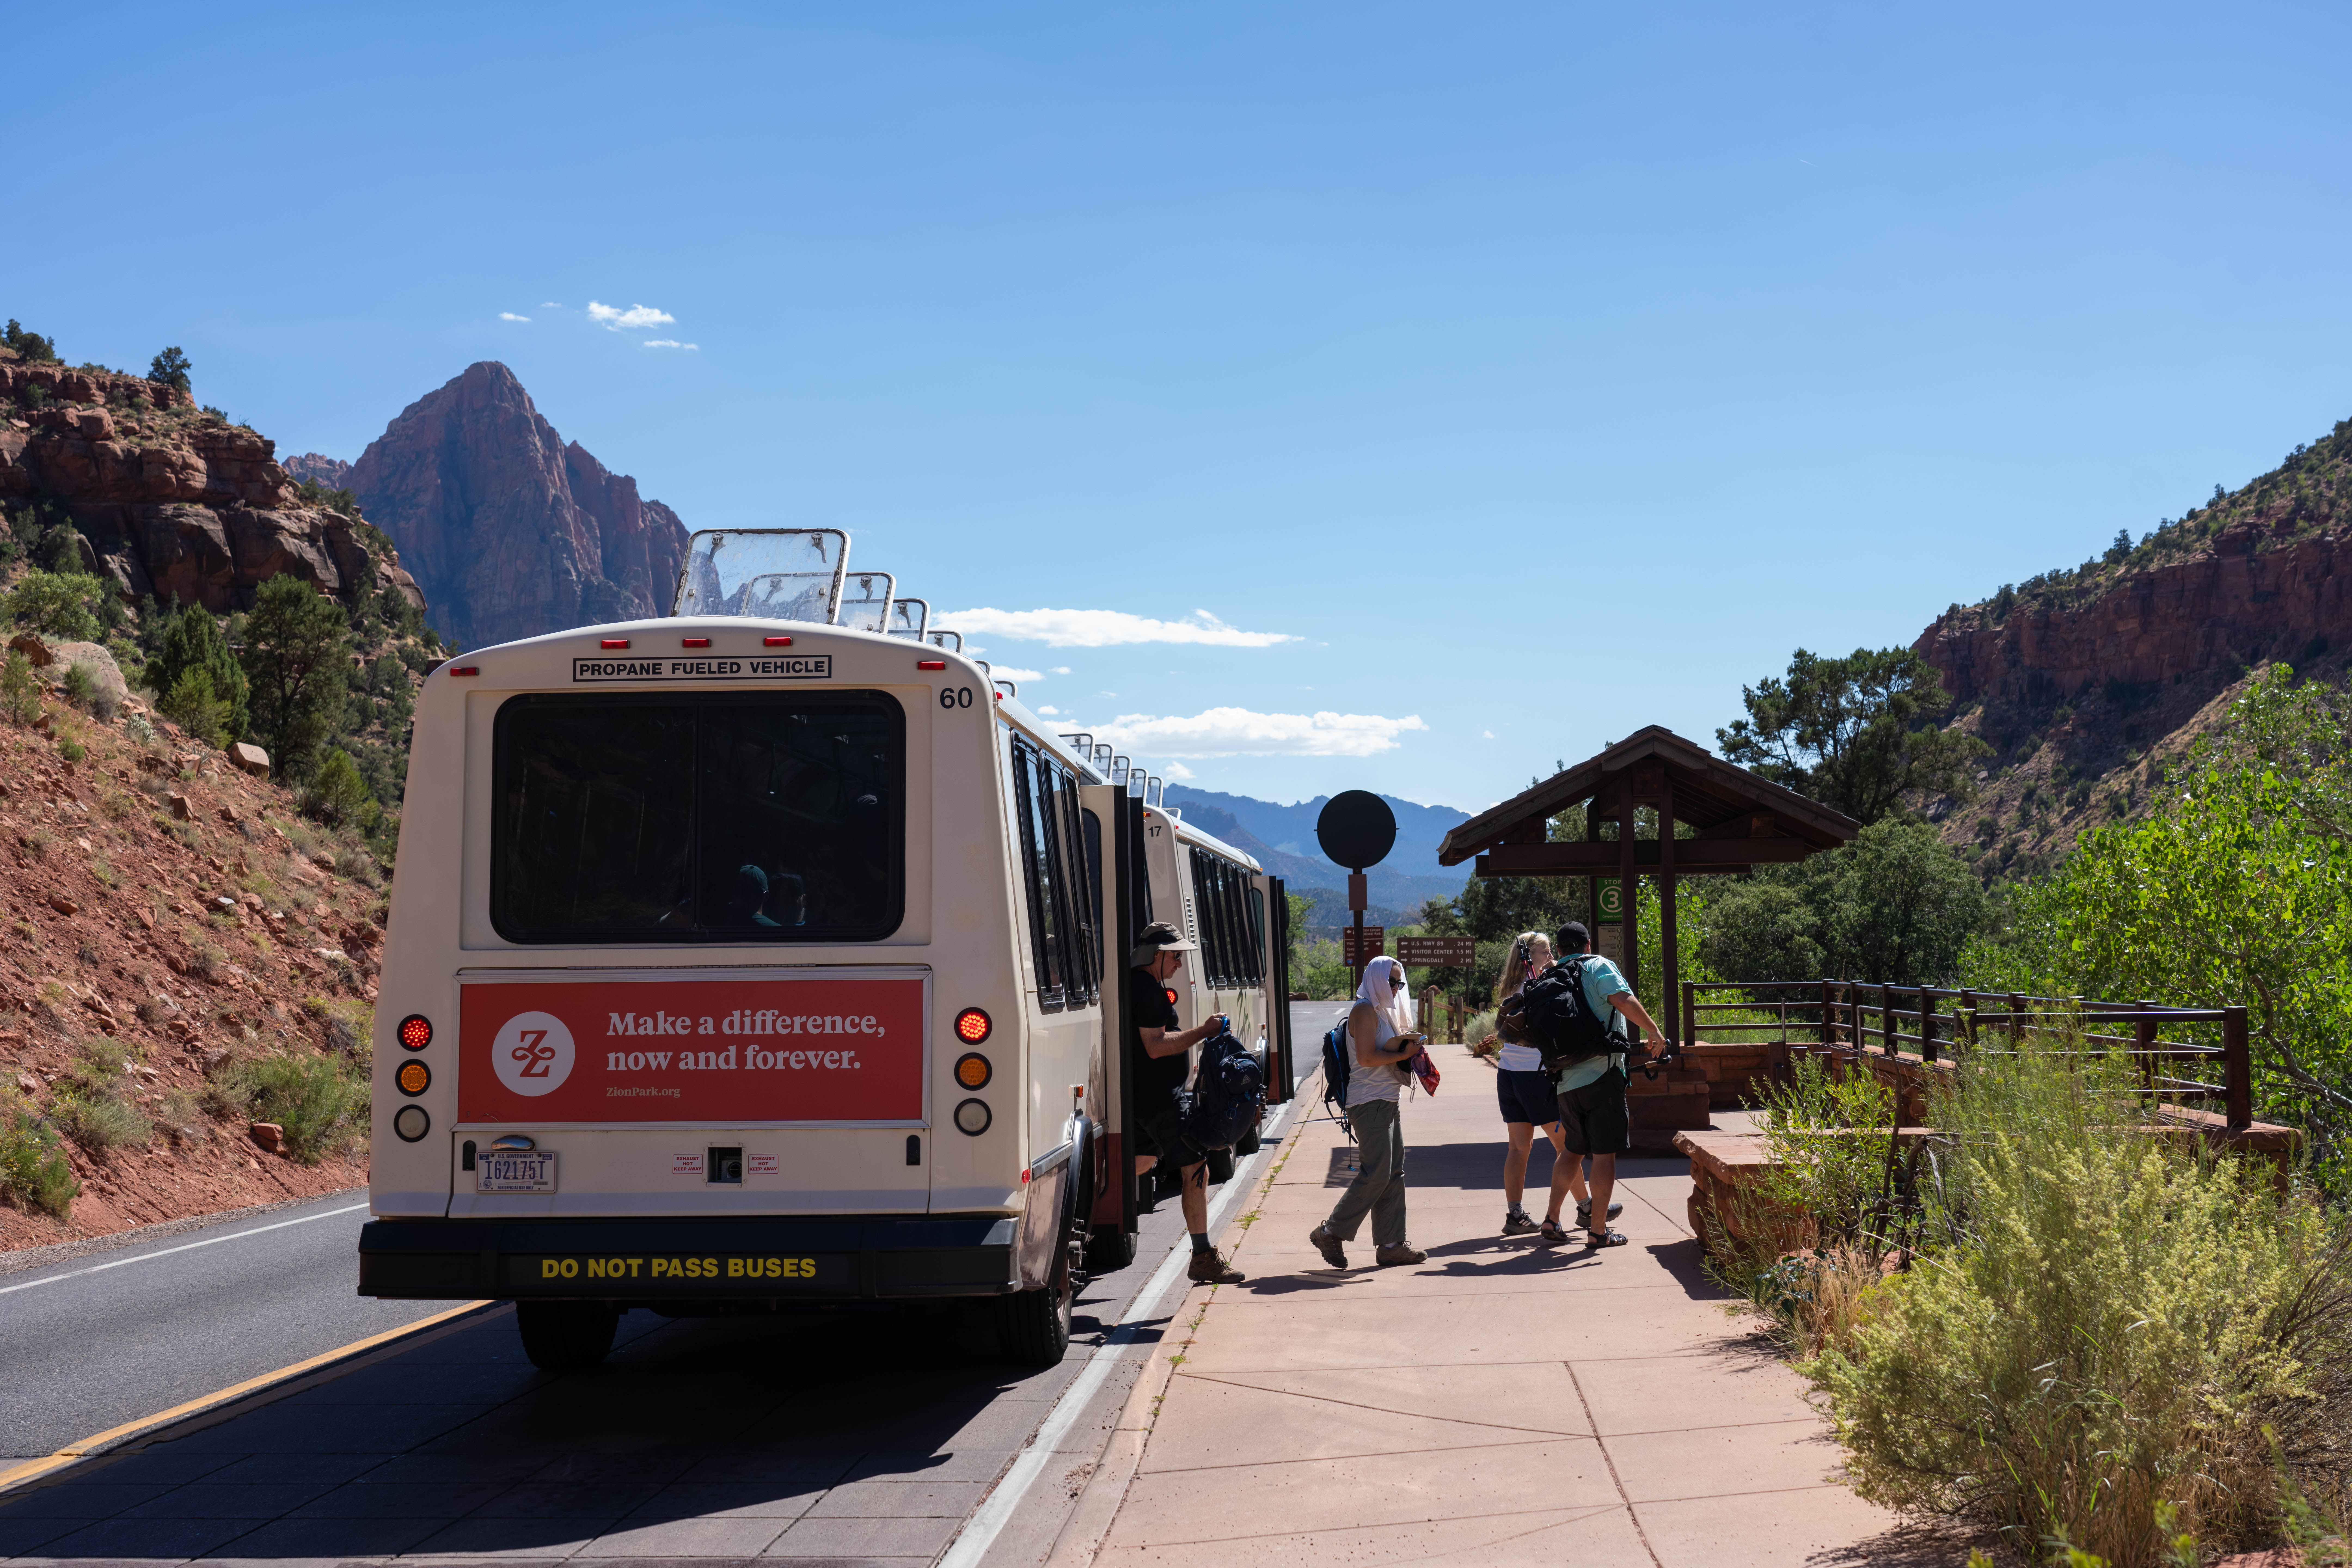 Visitors deboarding the Zion shuttle with sandstone cliffs in the background